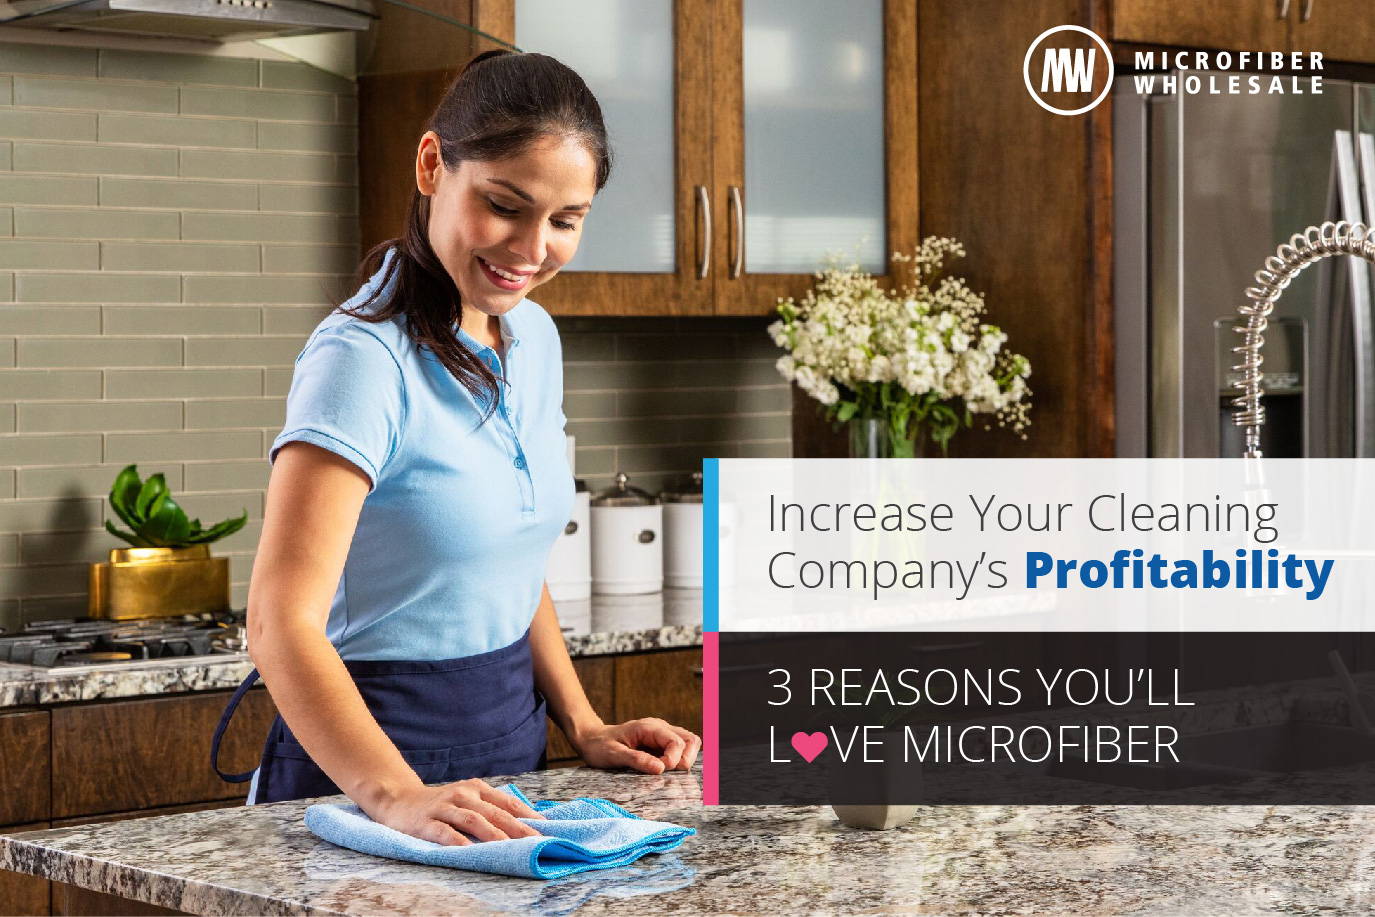 3 BENEFITS OF MICROFIBER THAT GROW YOUR CLEANING BUSINESS